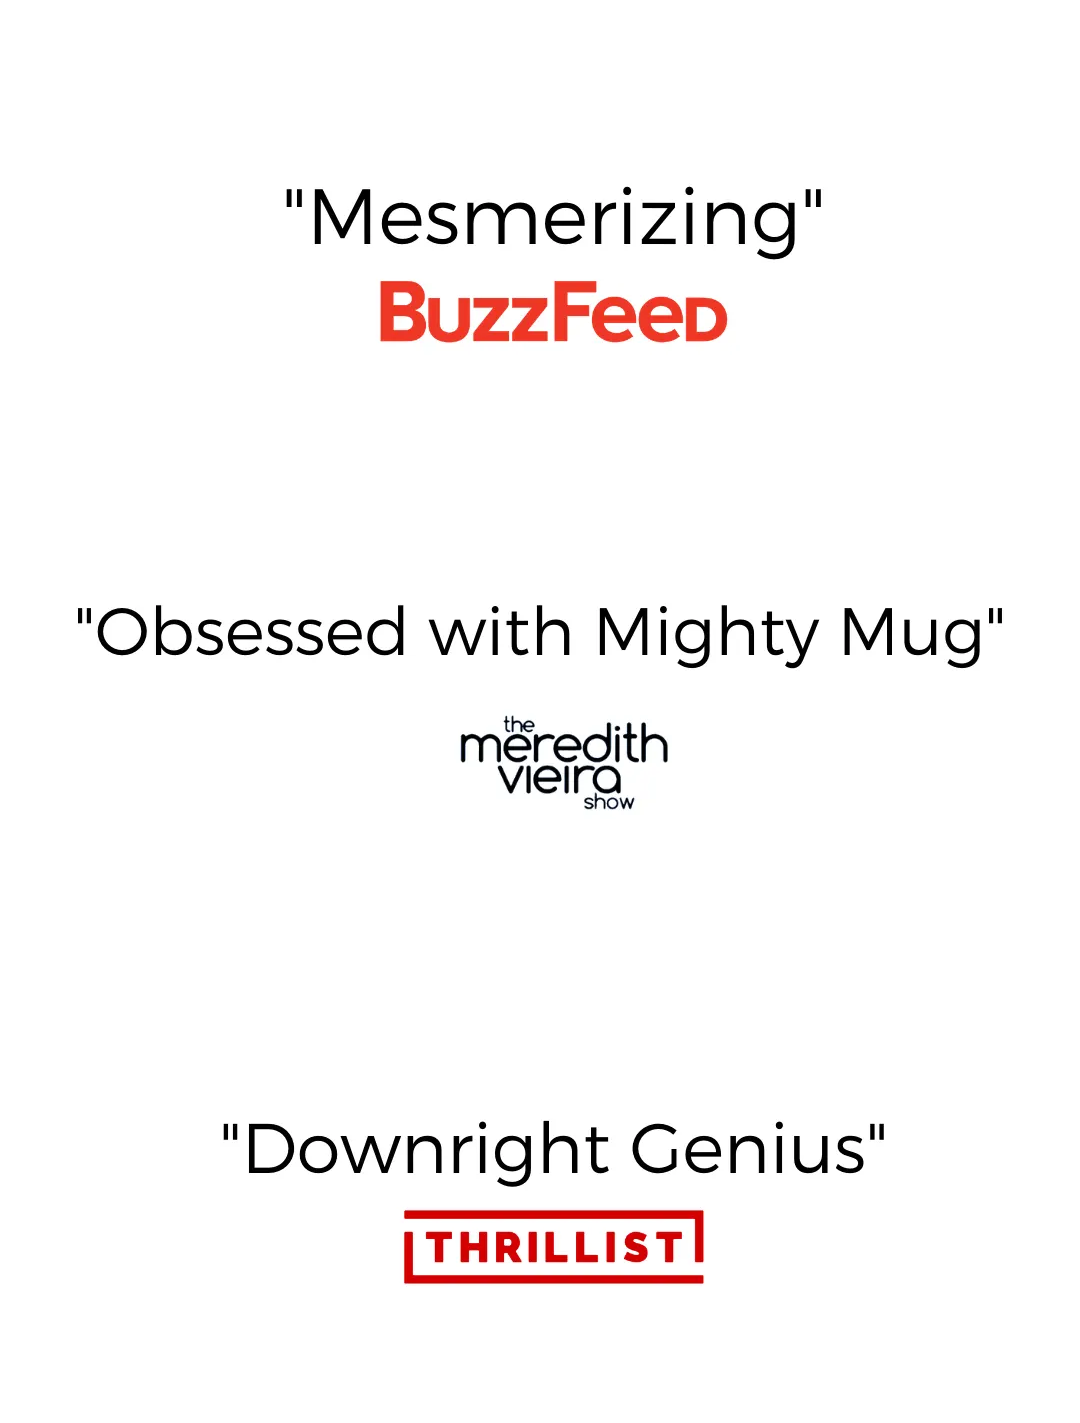  Mighty Mug, The Untippable Mug, Grips When Hit, Lifts for  Sips, Insulated Stainless Steel Tumbler, Cupholder Friendly, Gifts for  Women Men All, Leakproof